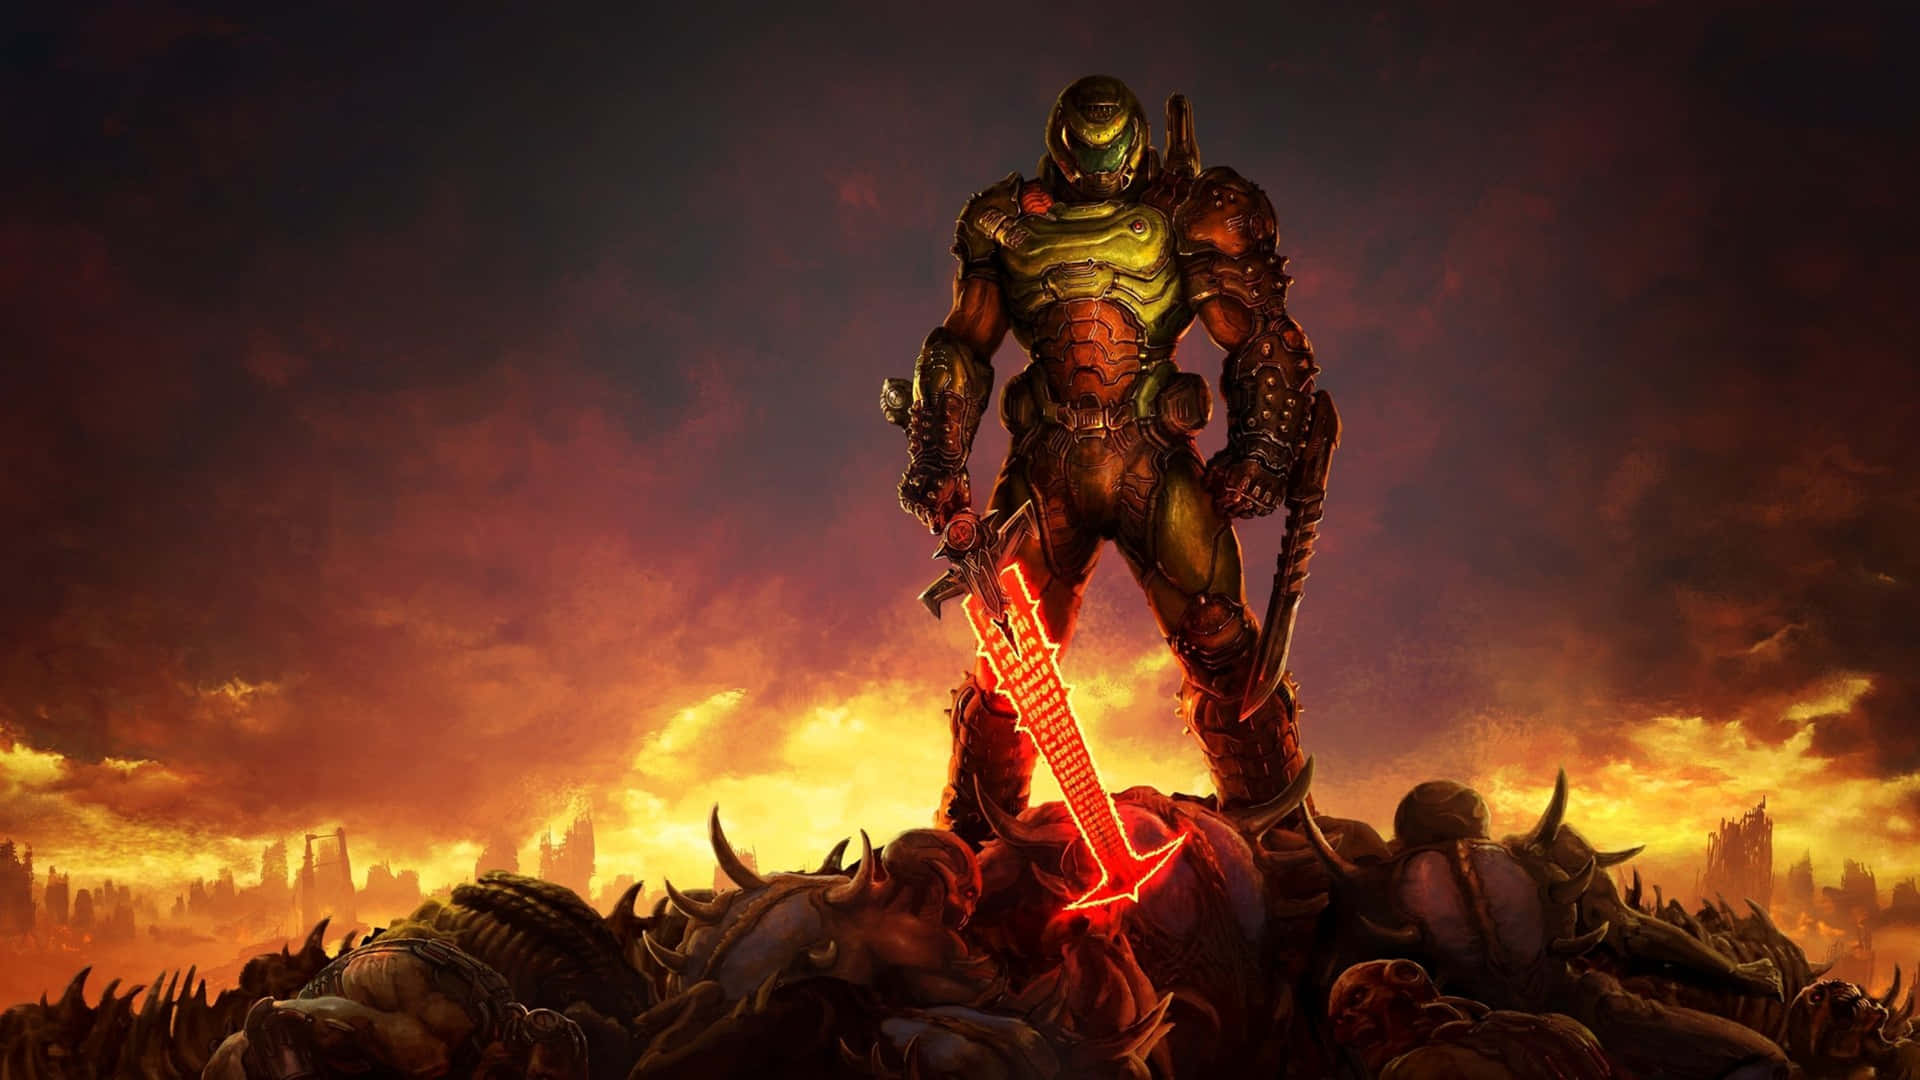 Step into the world of hell with DOOM Eternal 4K Wallpaper